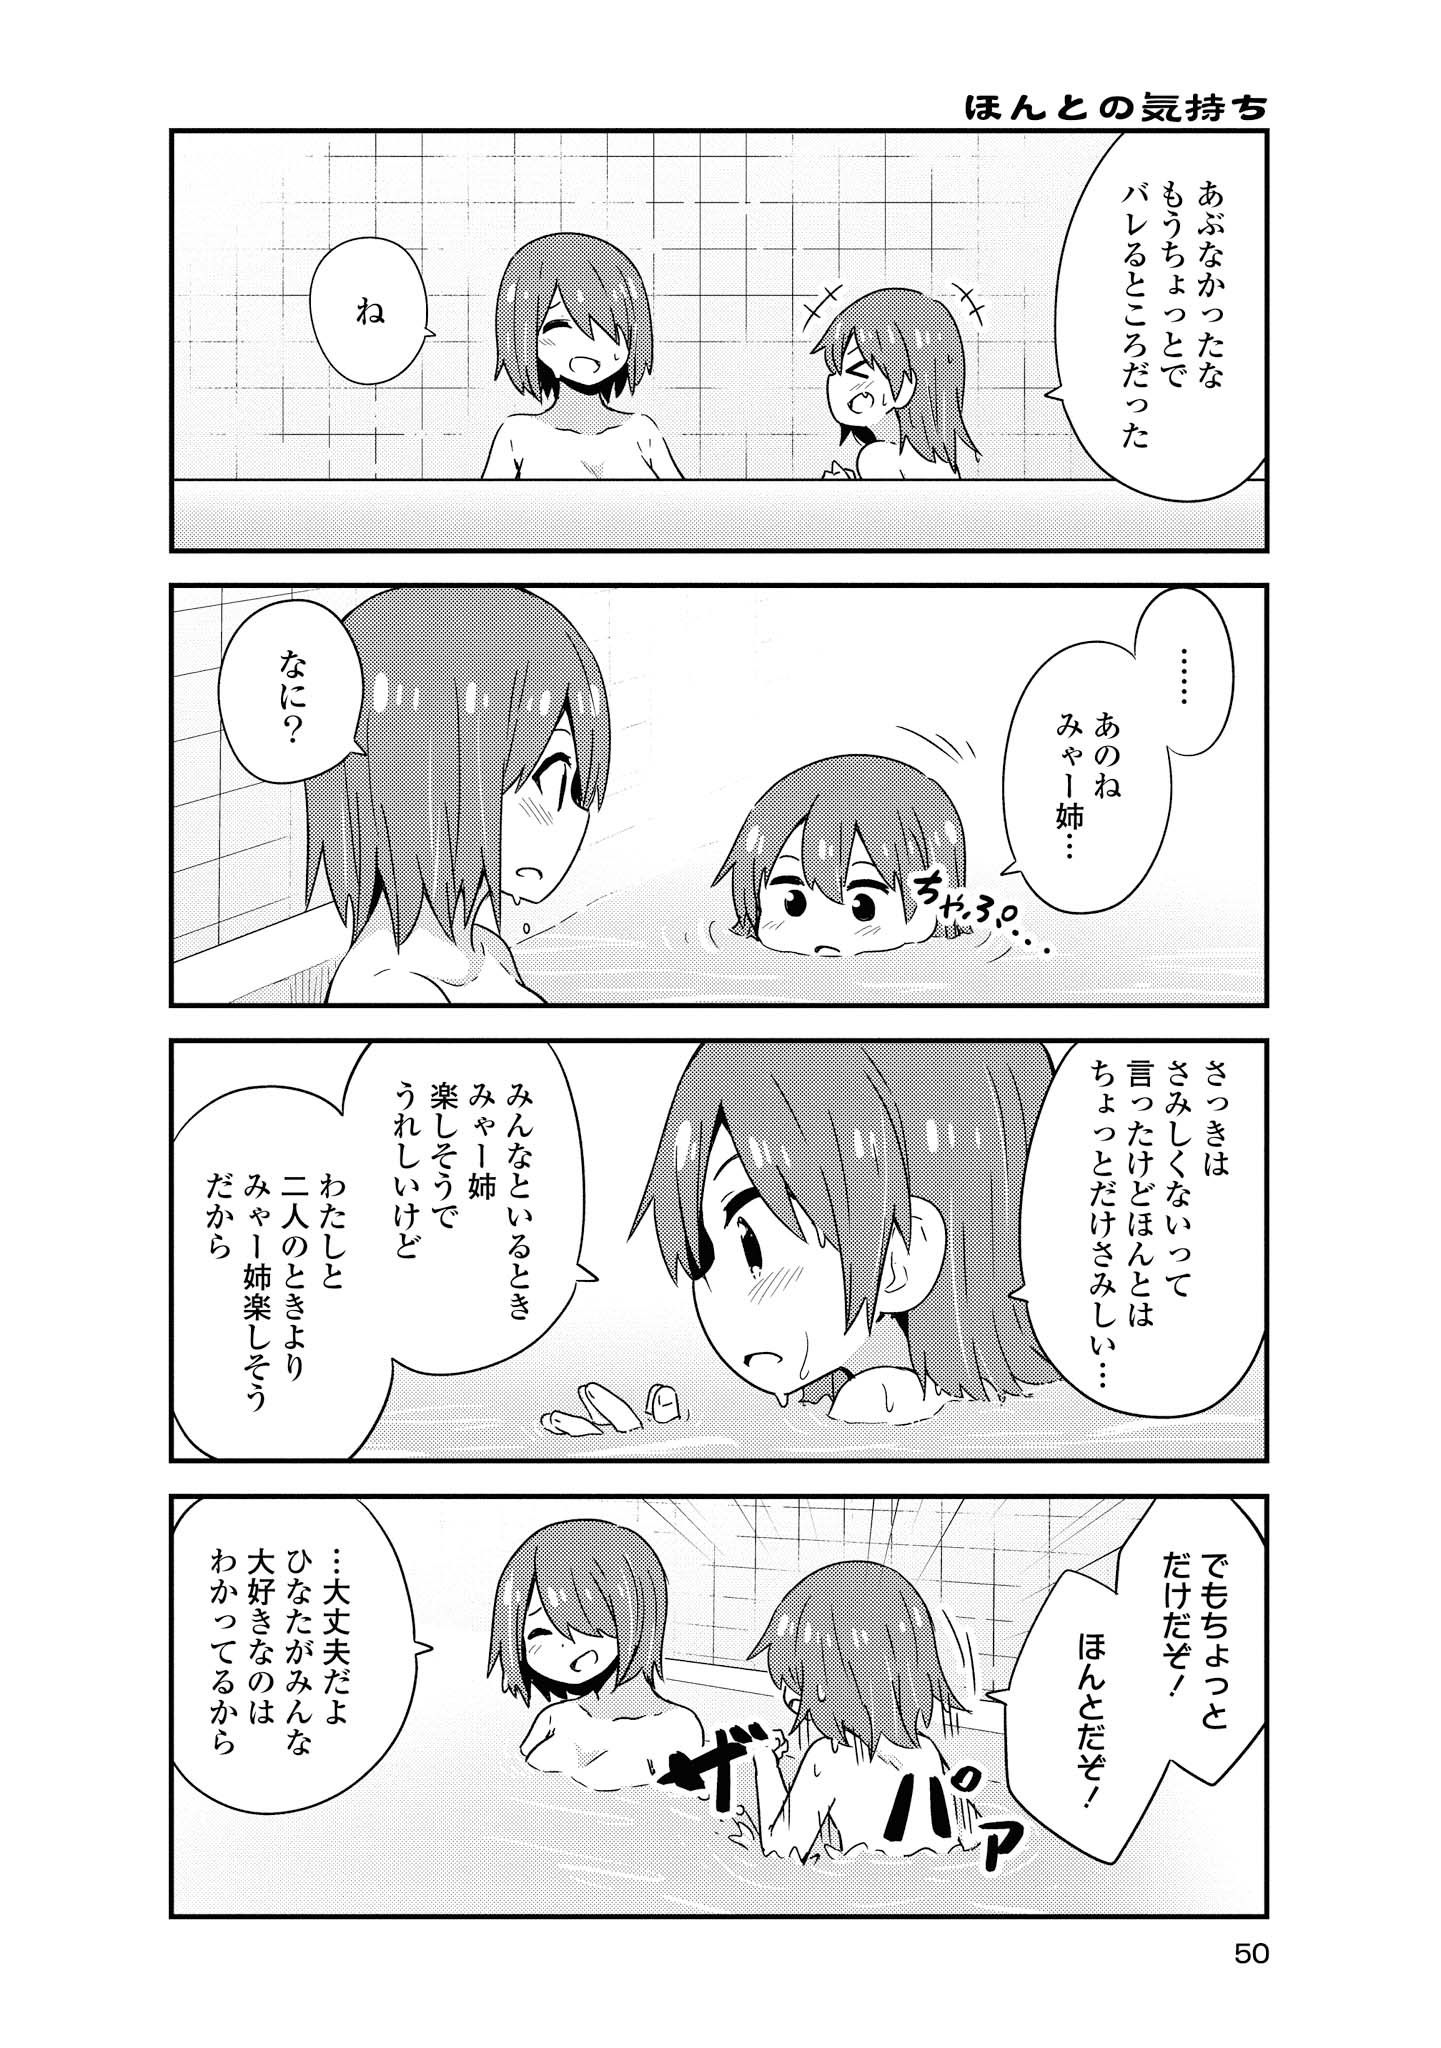 Wataten! An Angel Flew Down to Me 私に天使が舞い降りた！ 第46話 - Page 8